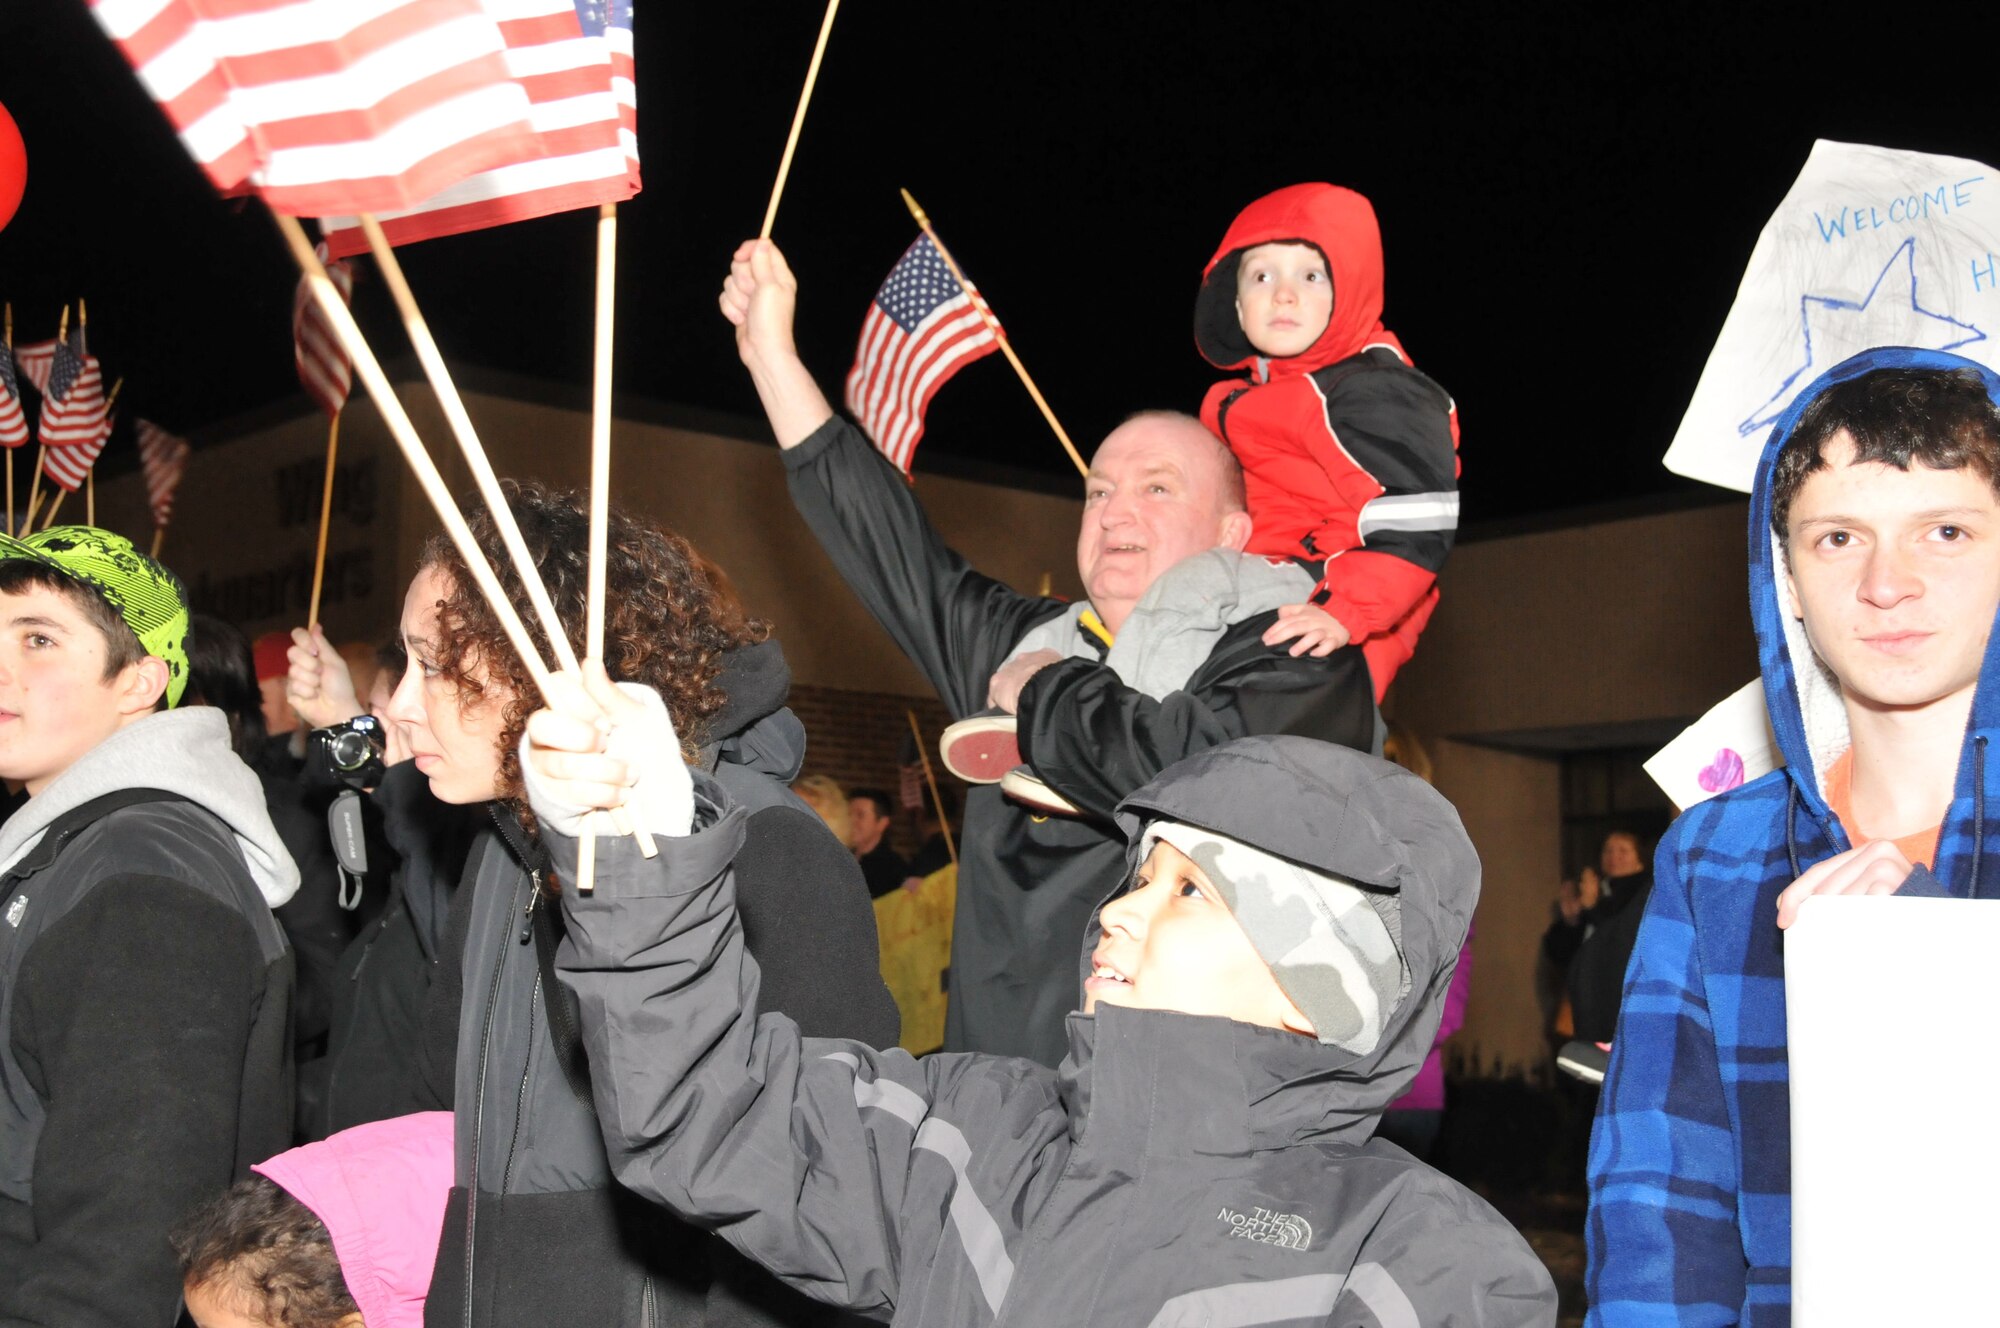 Family and friends give an enthusiastic welcome-home reception to members of the 103rd Civil Engineer Squadron after returning from Afghanistan to Bradley Air National Guard Base, East Granby, Conn., Feb. 20, 2012. The Connecticut Guardsmen had been deployed since July 2011. (U.S. Air Force photo by Tech. Sgt. Erin McNamara\RELEASED)